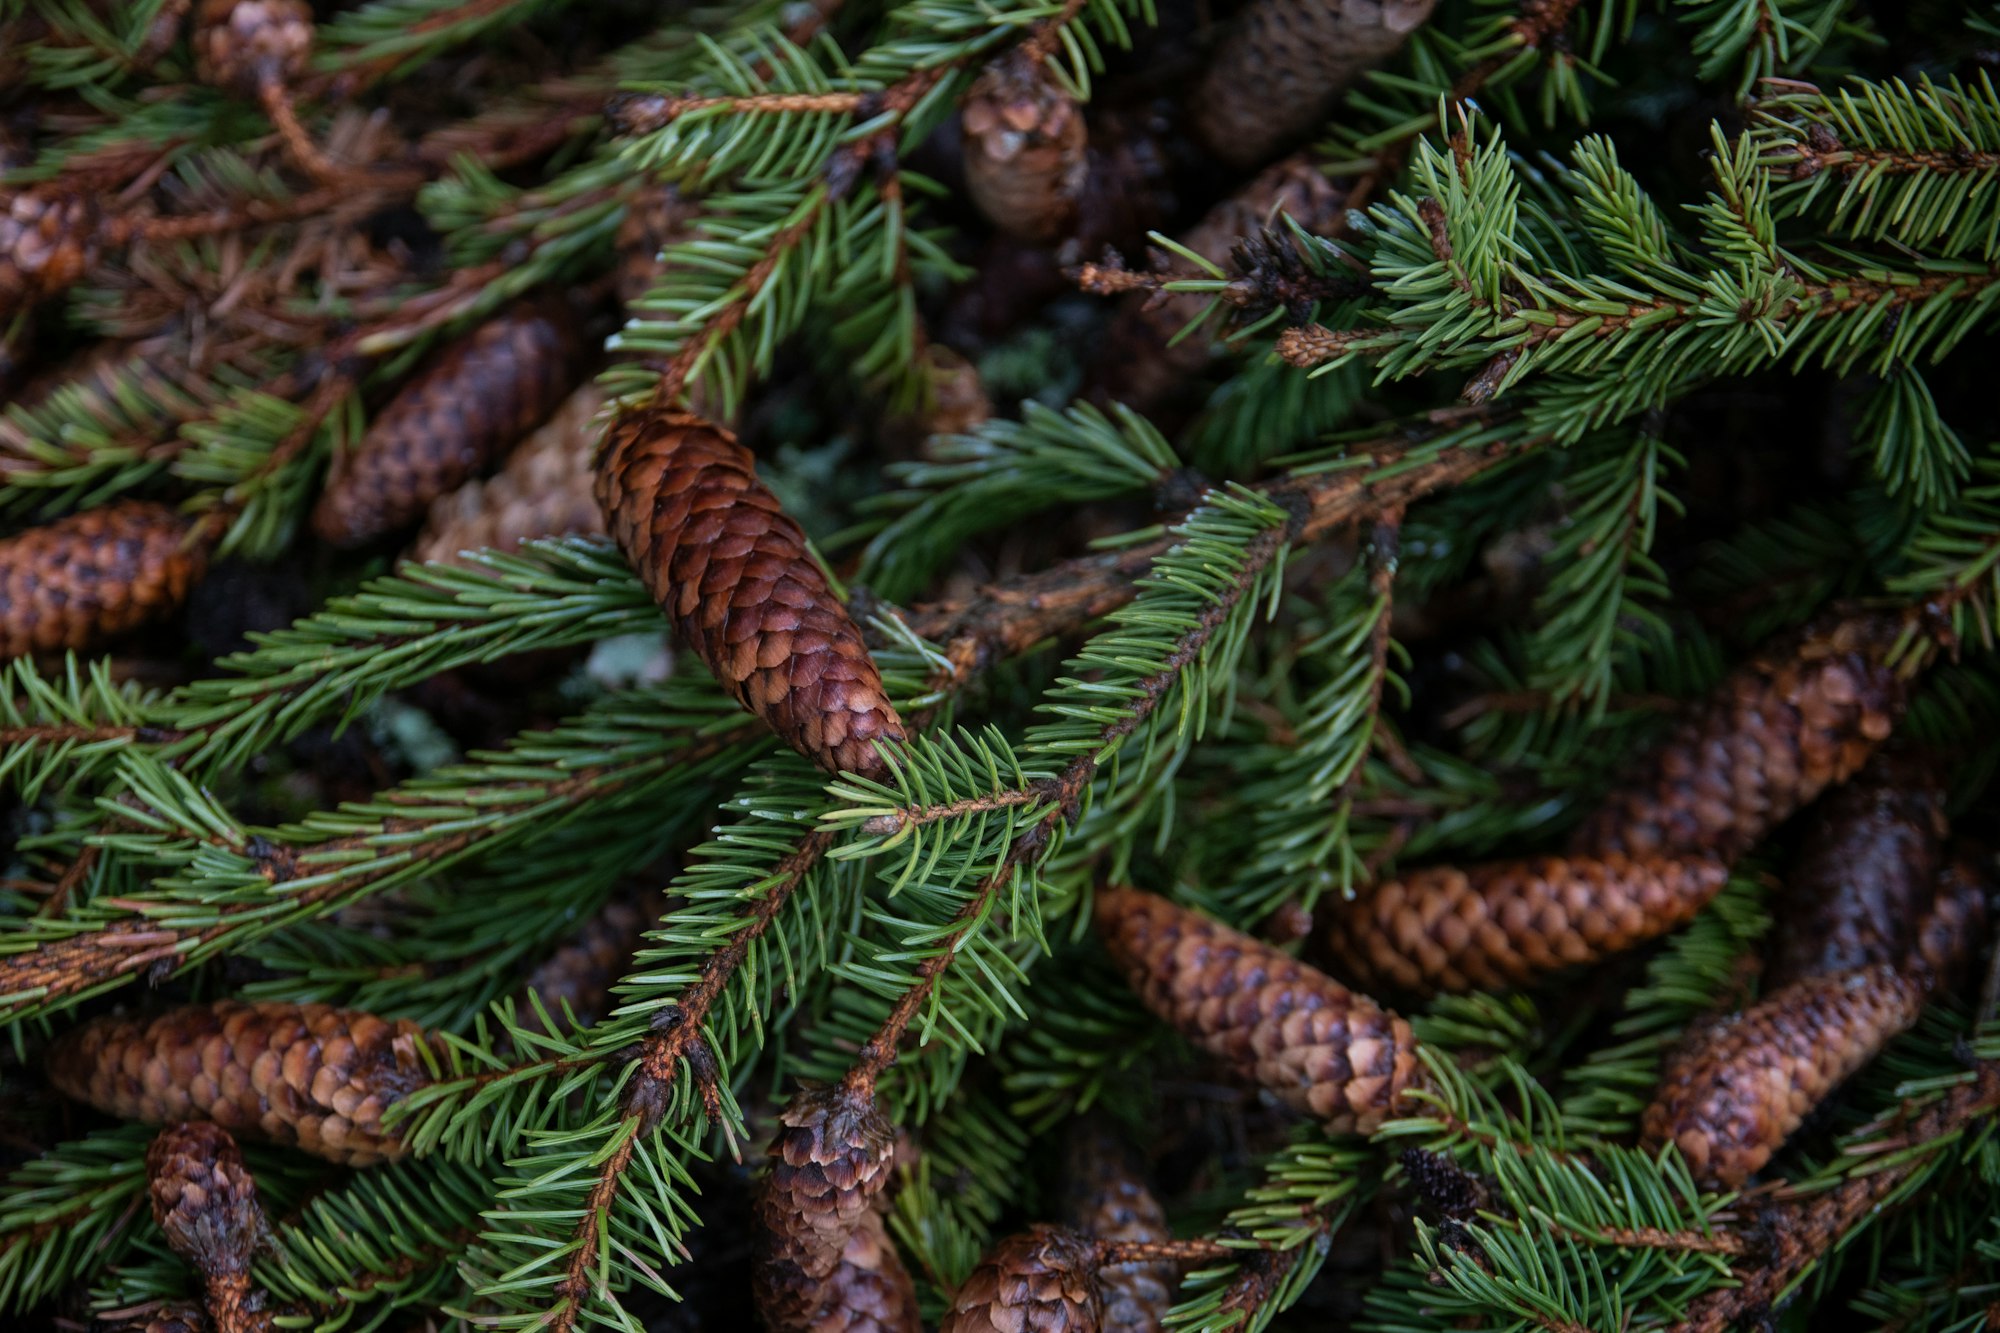 Spruce cones on branches